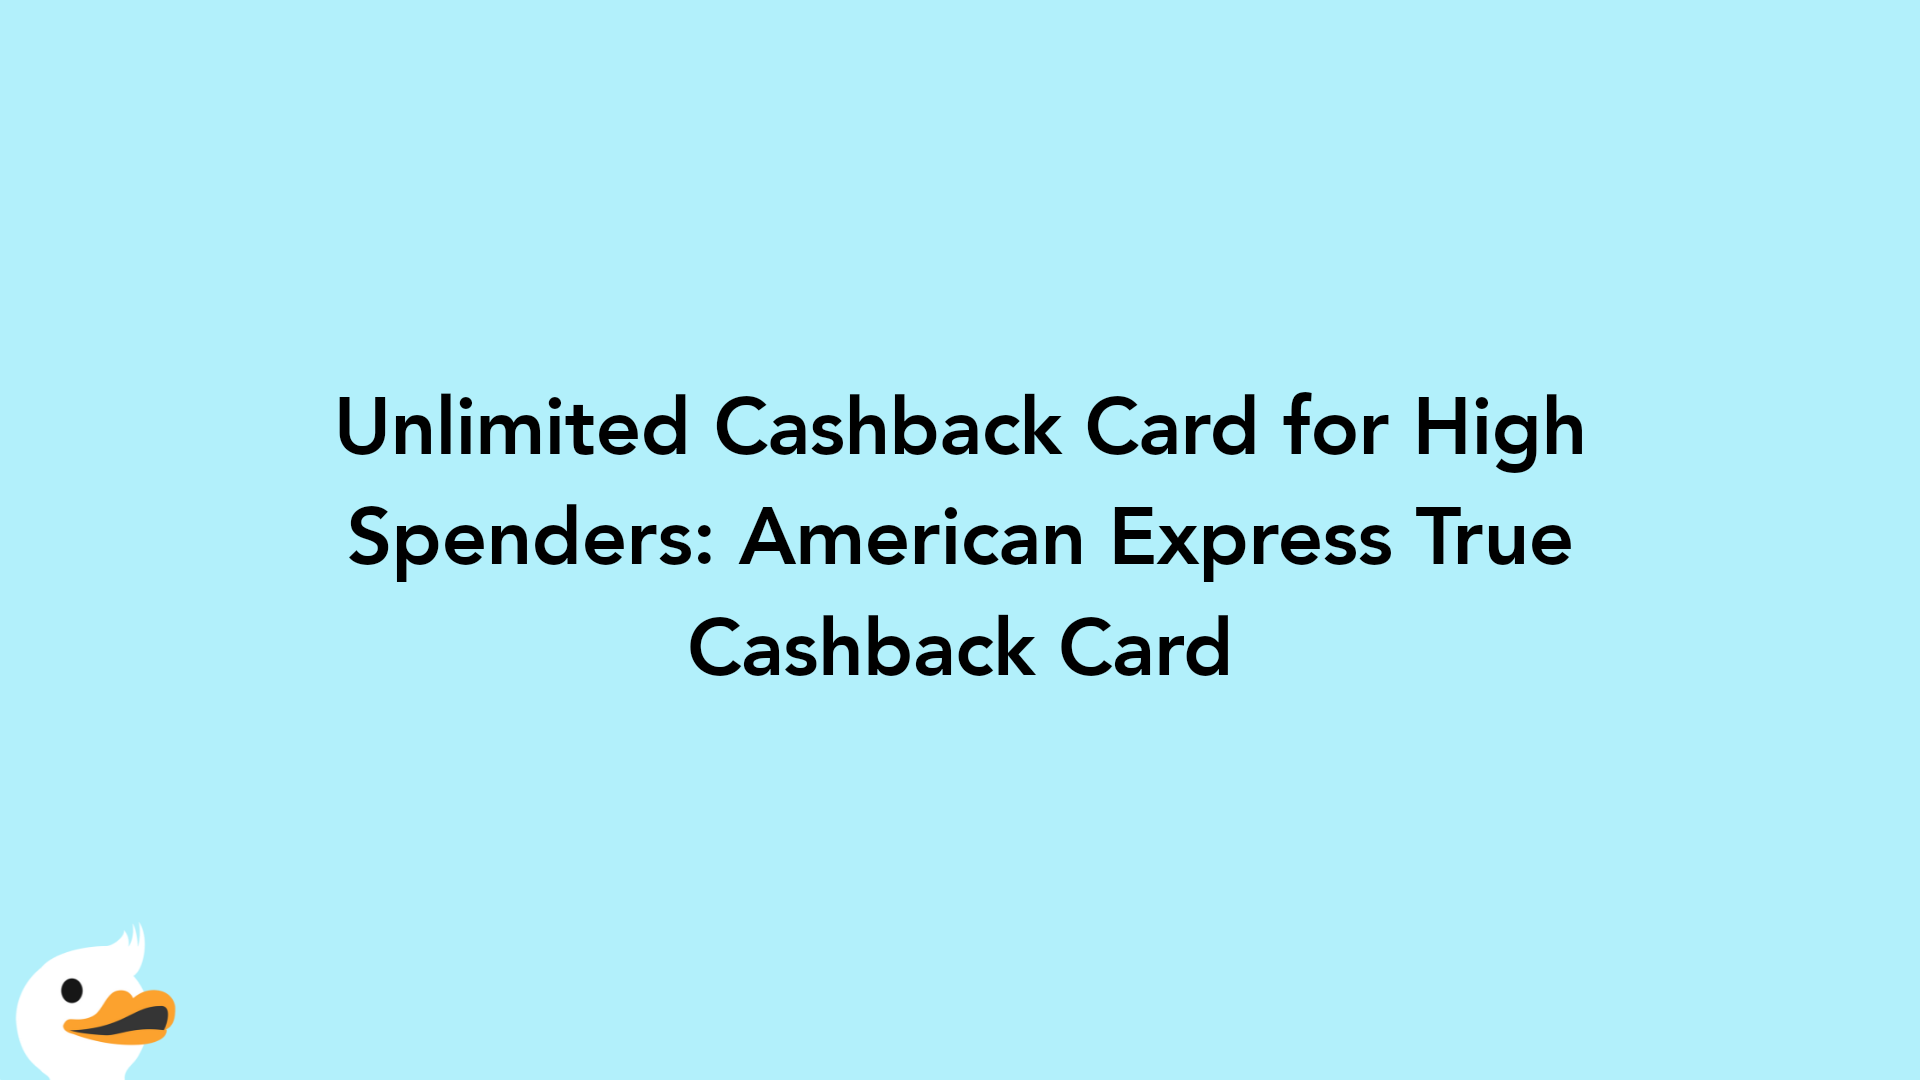 Unlimited Cashback Card for High Spenders: American Express True Cashback Card